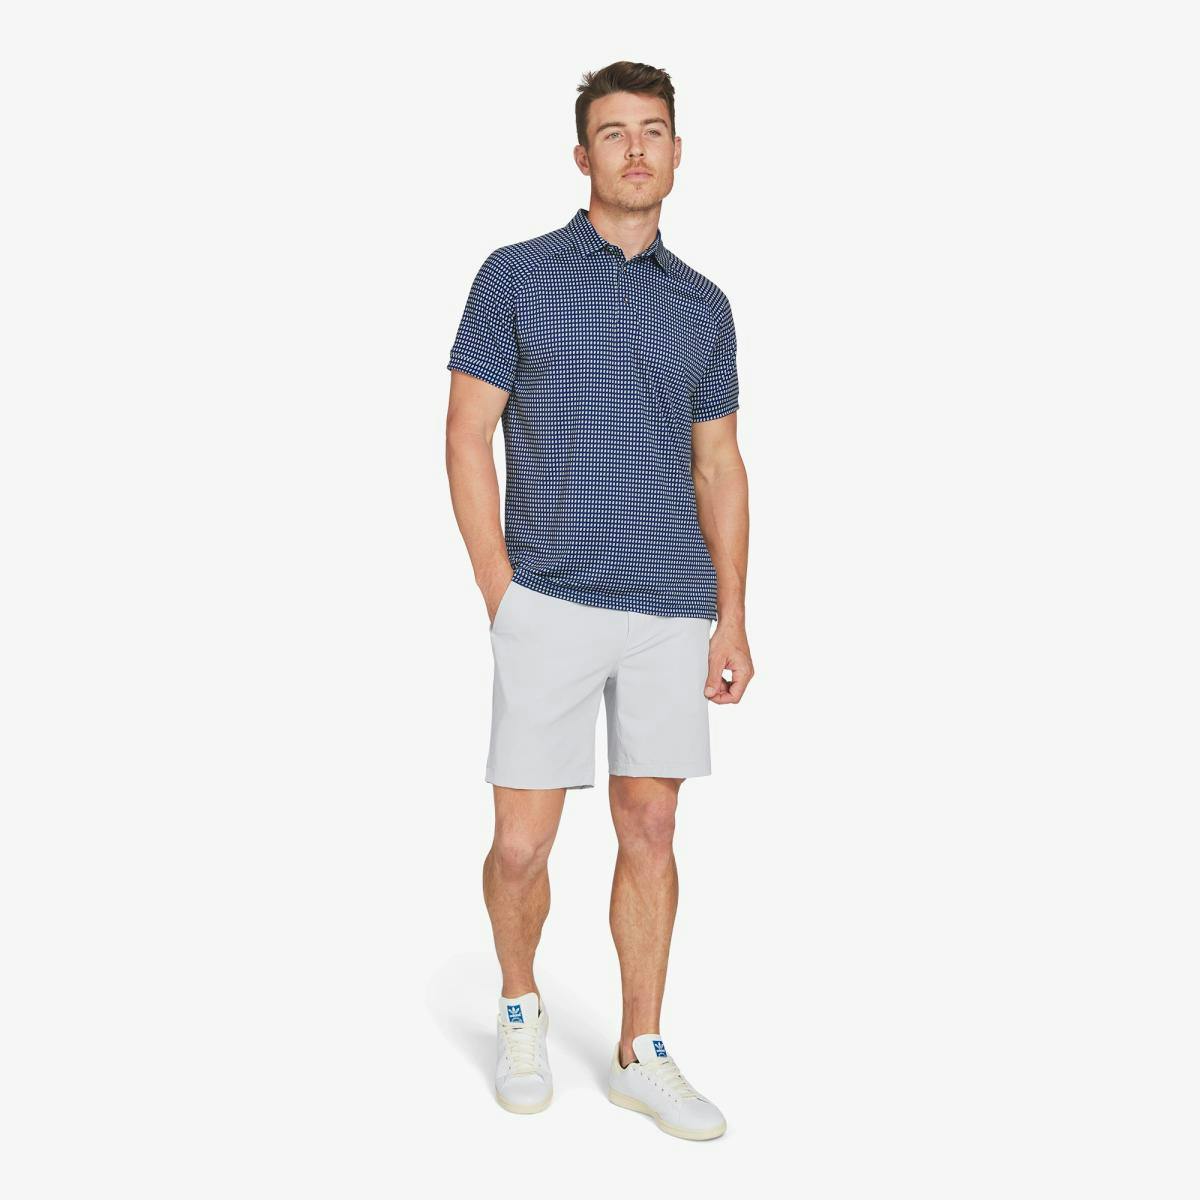 Versa Clubhouse Polo - Product Image 2